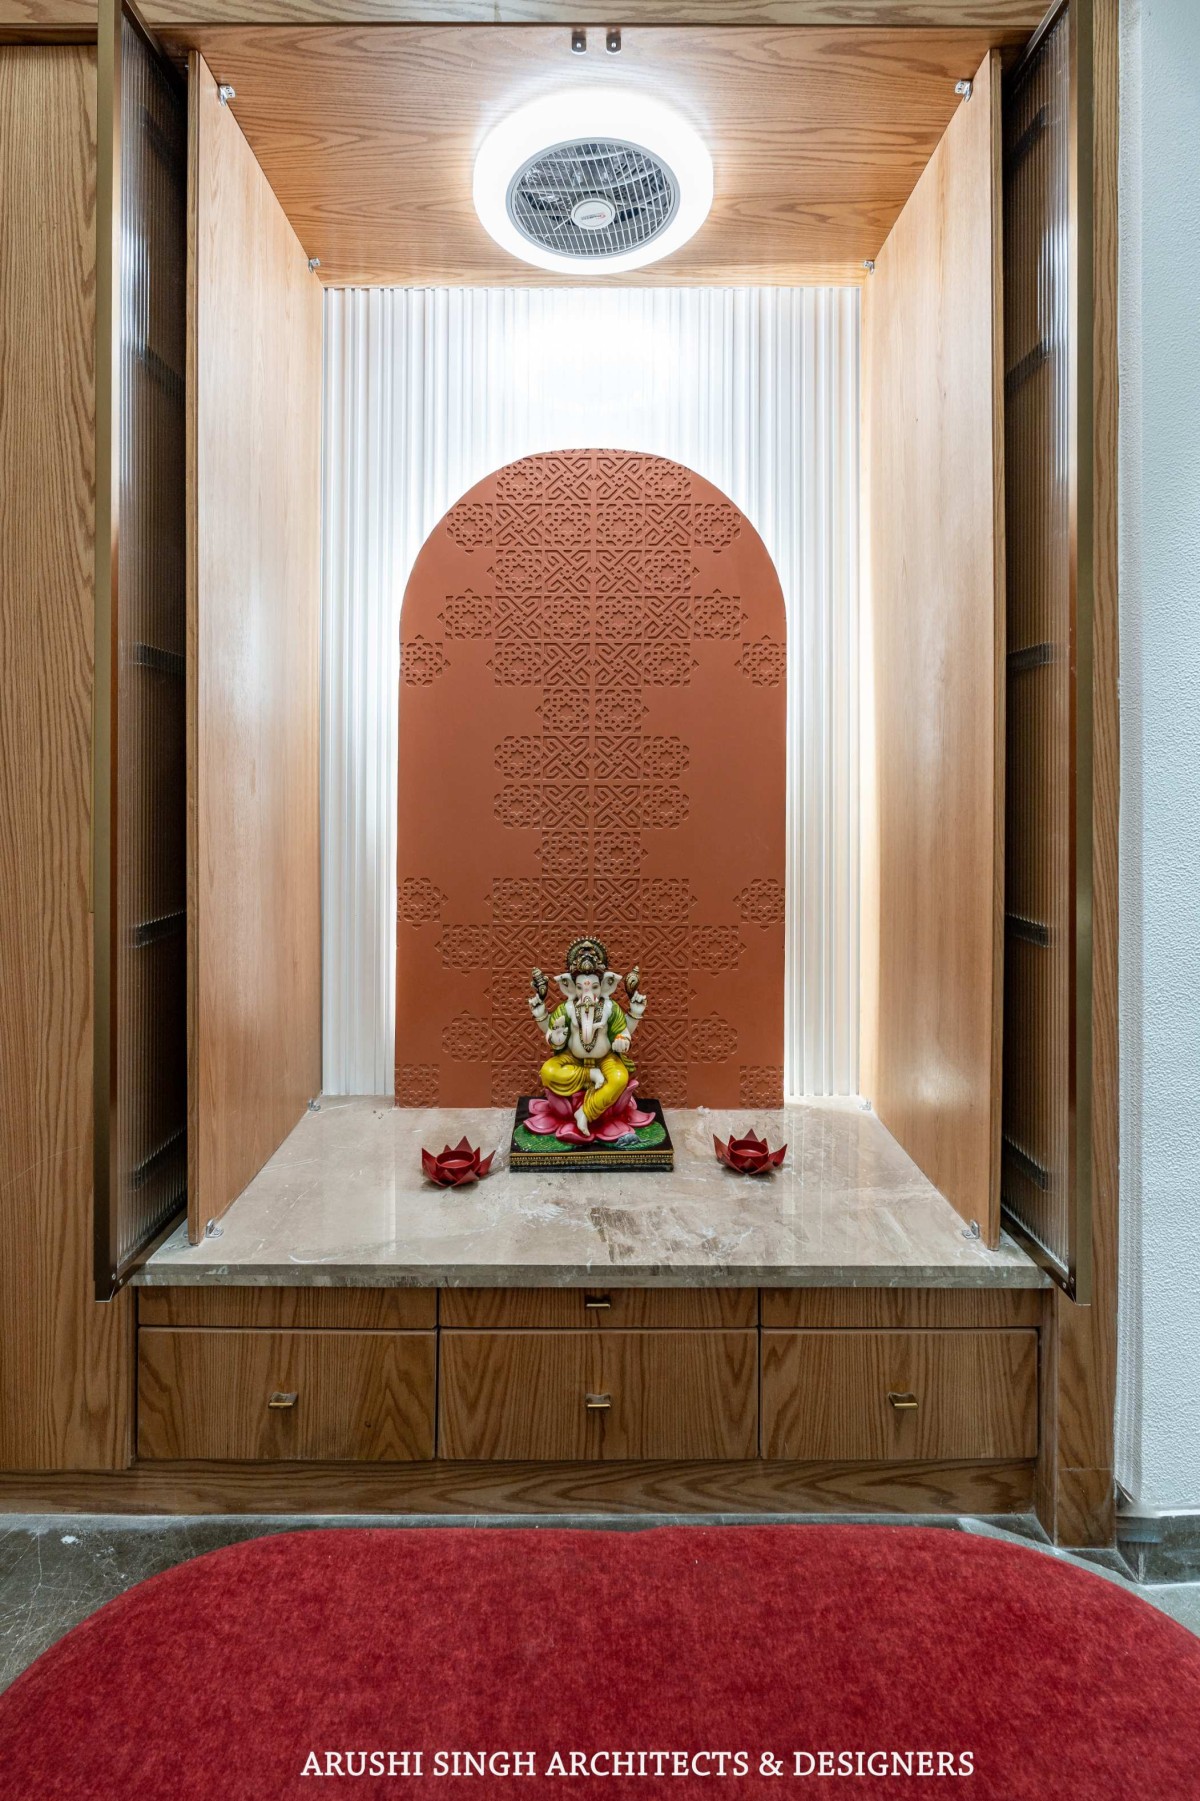 Pooja room of The Narayan House by Arushi Singh Architects & Designers